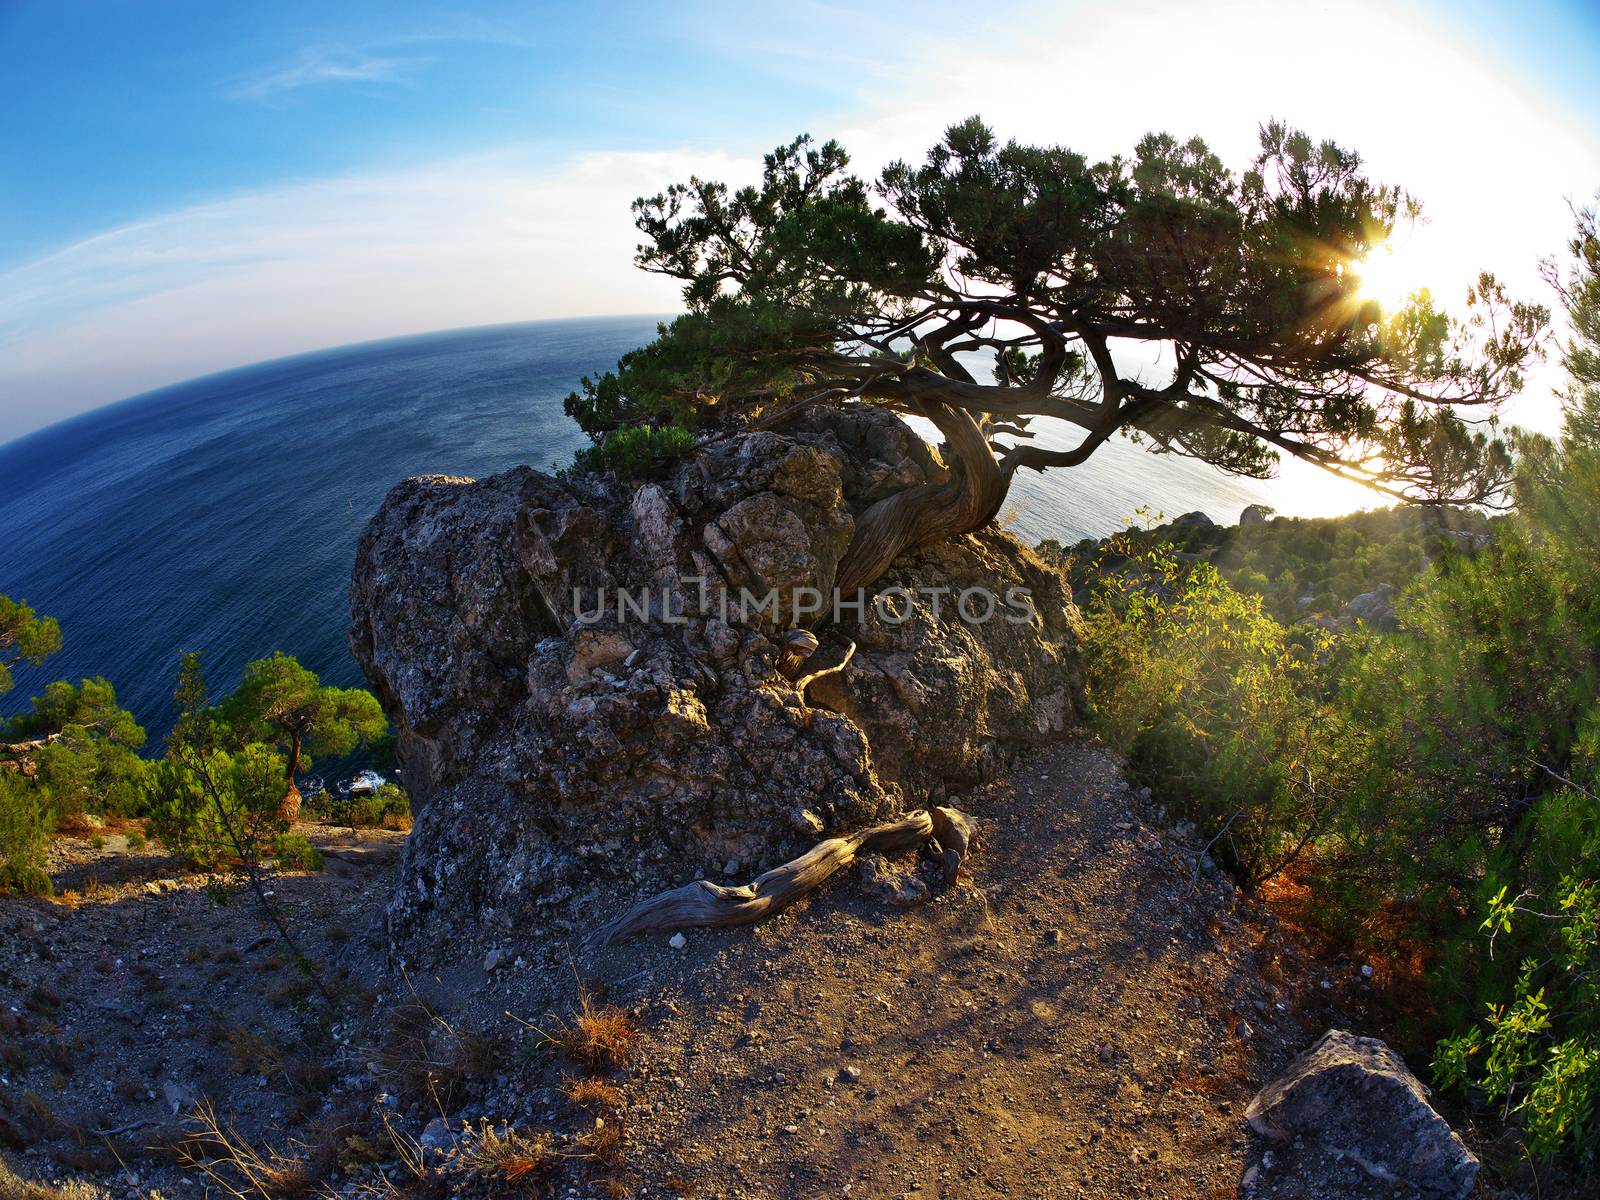 Beautiful the sun's rays through the crown of pines on the seashore in fisheye vision